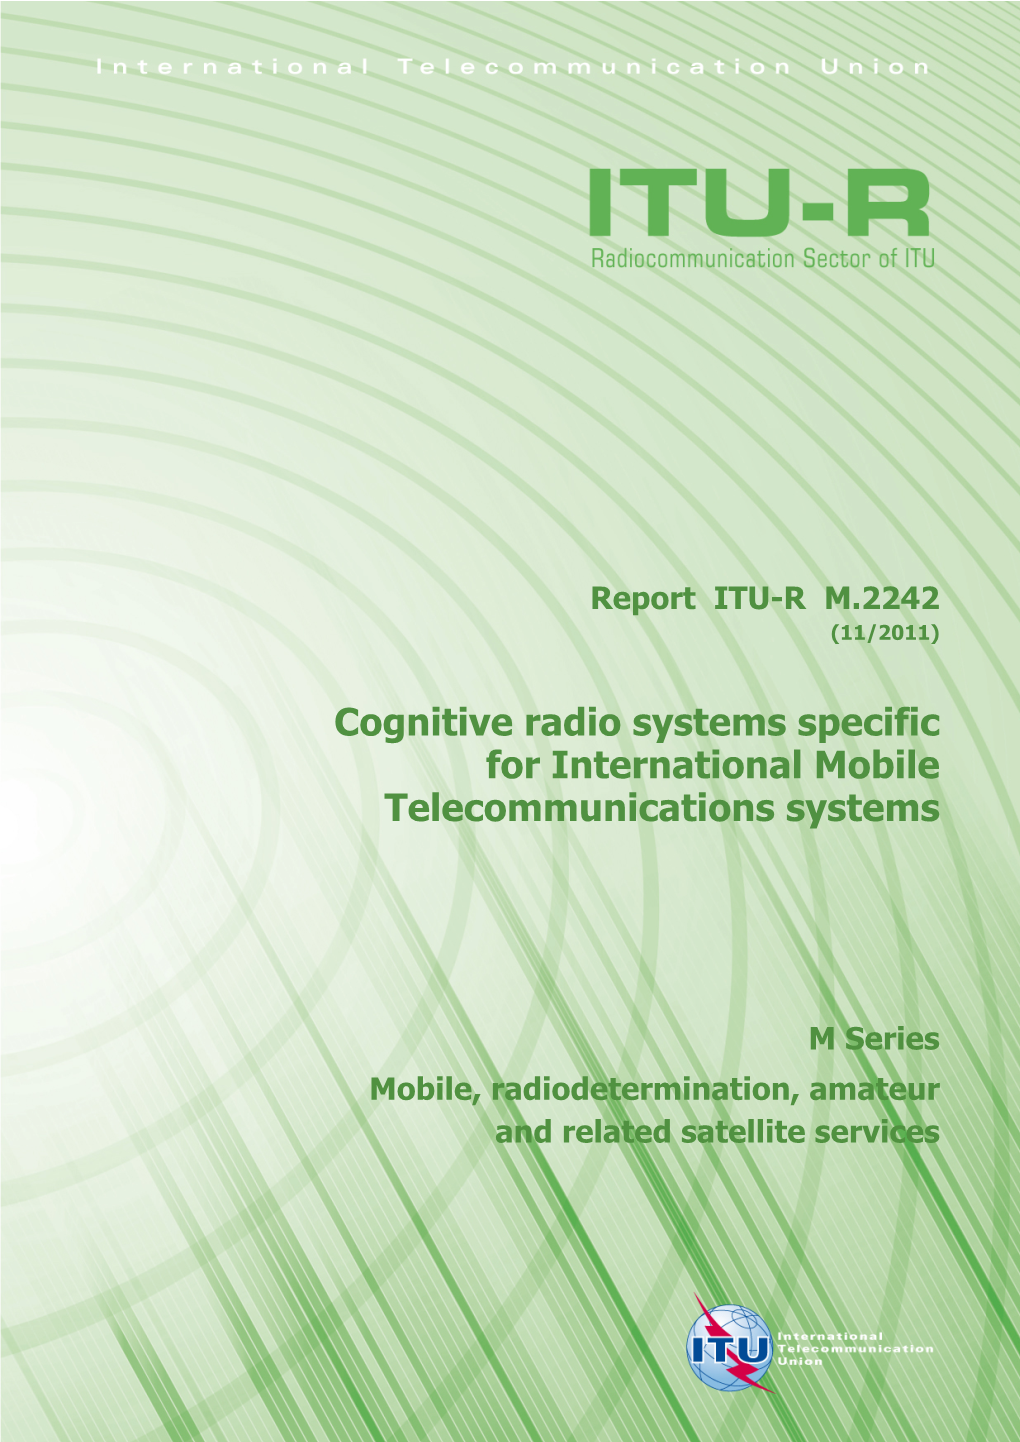 Cognitive Radio Systems Specific for International Mobile Telecommunications Systems